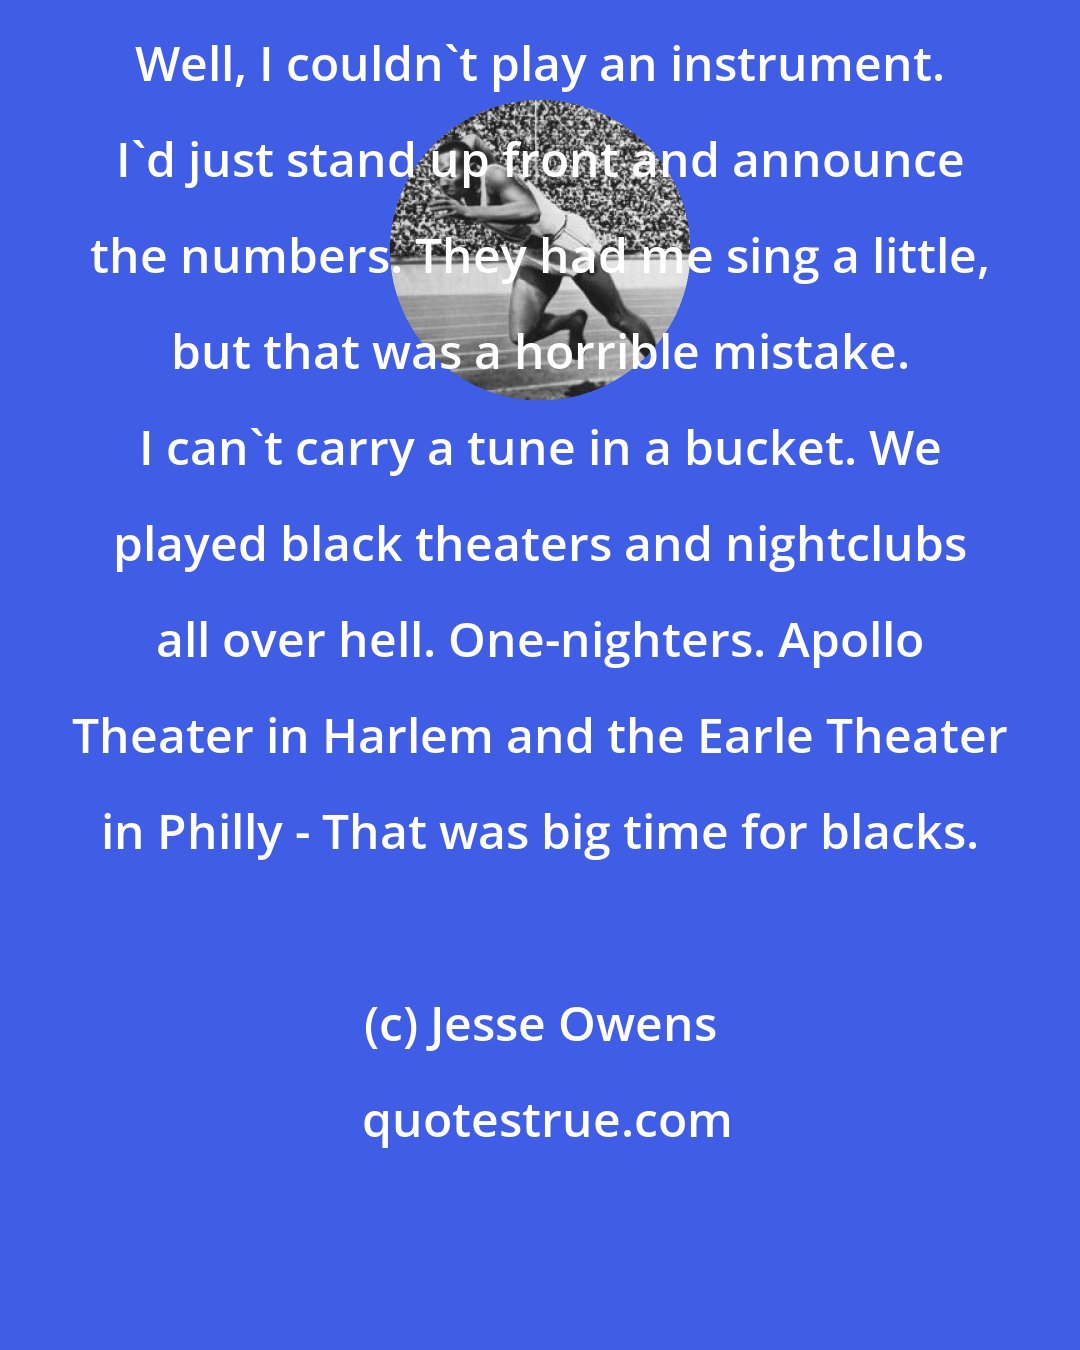 Jesse Owens: Well, I couldn't play an instrument. I'd just stand up front and announce the numbers. They had me sing a little, but that was a horrible mistake. I can't carry a tune in a bucket. We played black theaters and nightclubs all over hell. One-nighters. Apollo Theater in Harlem and the Earle Theater in Philly - That was big time for blacks.